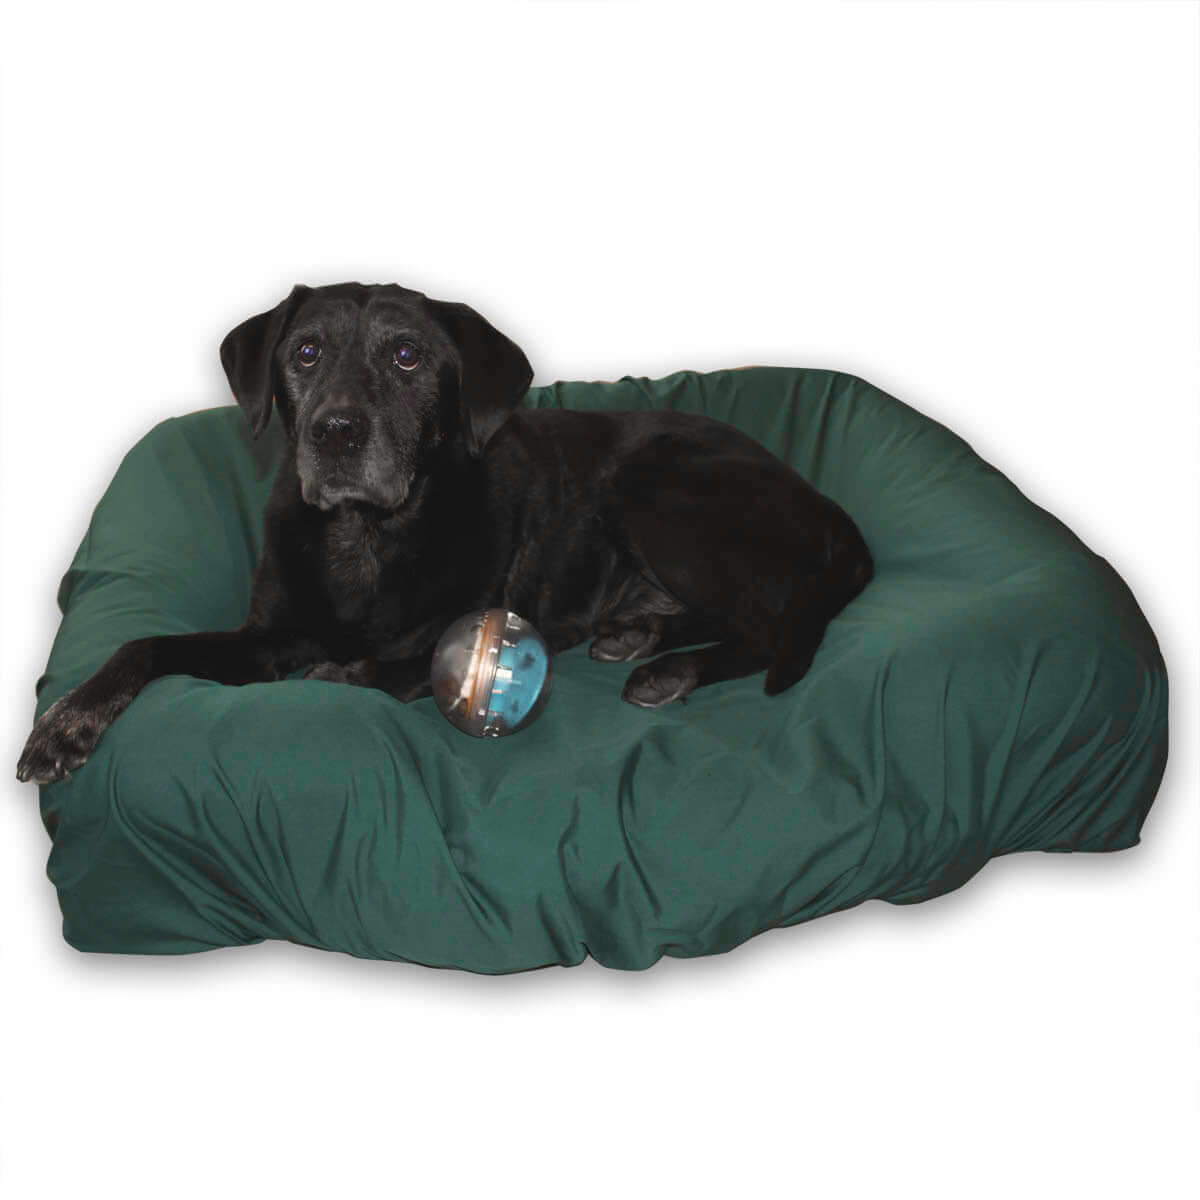 Hunter Green PawSheets on Large Pet Fusion Dog Bed